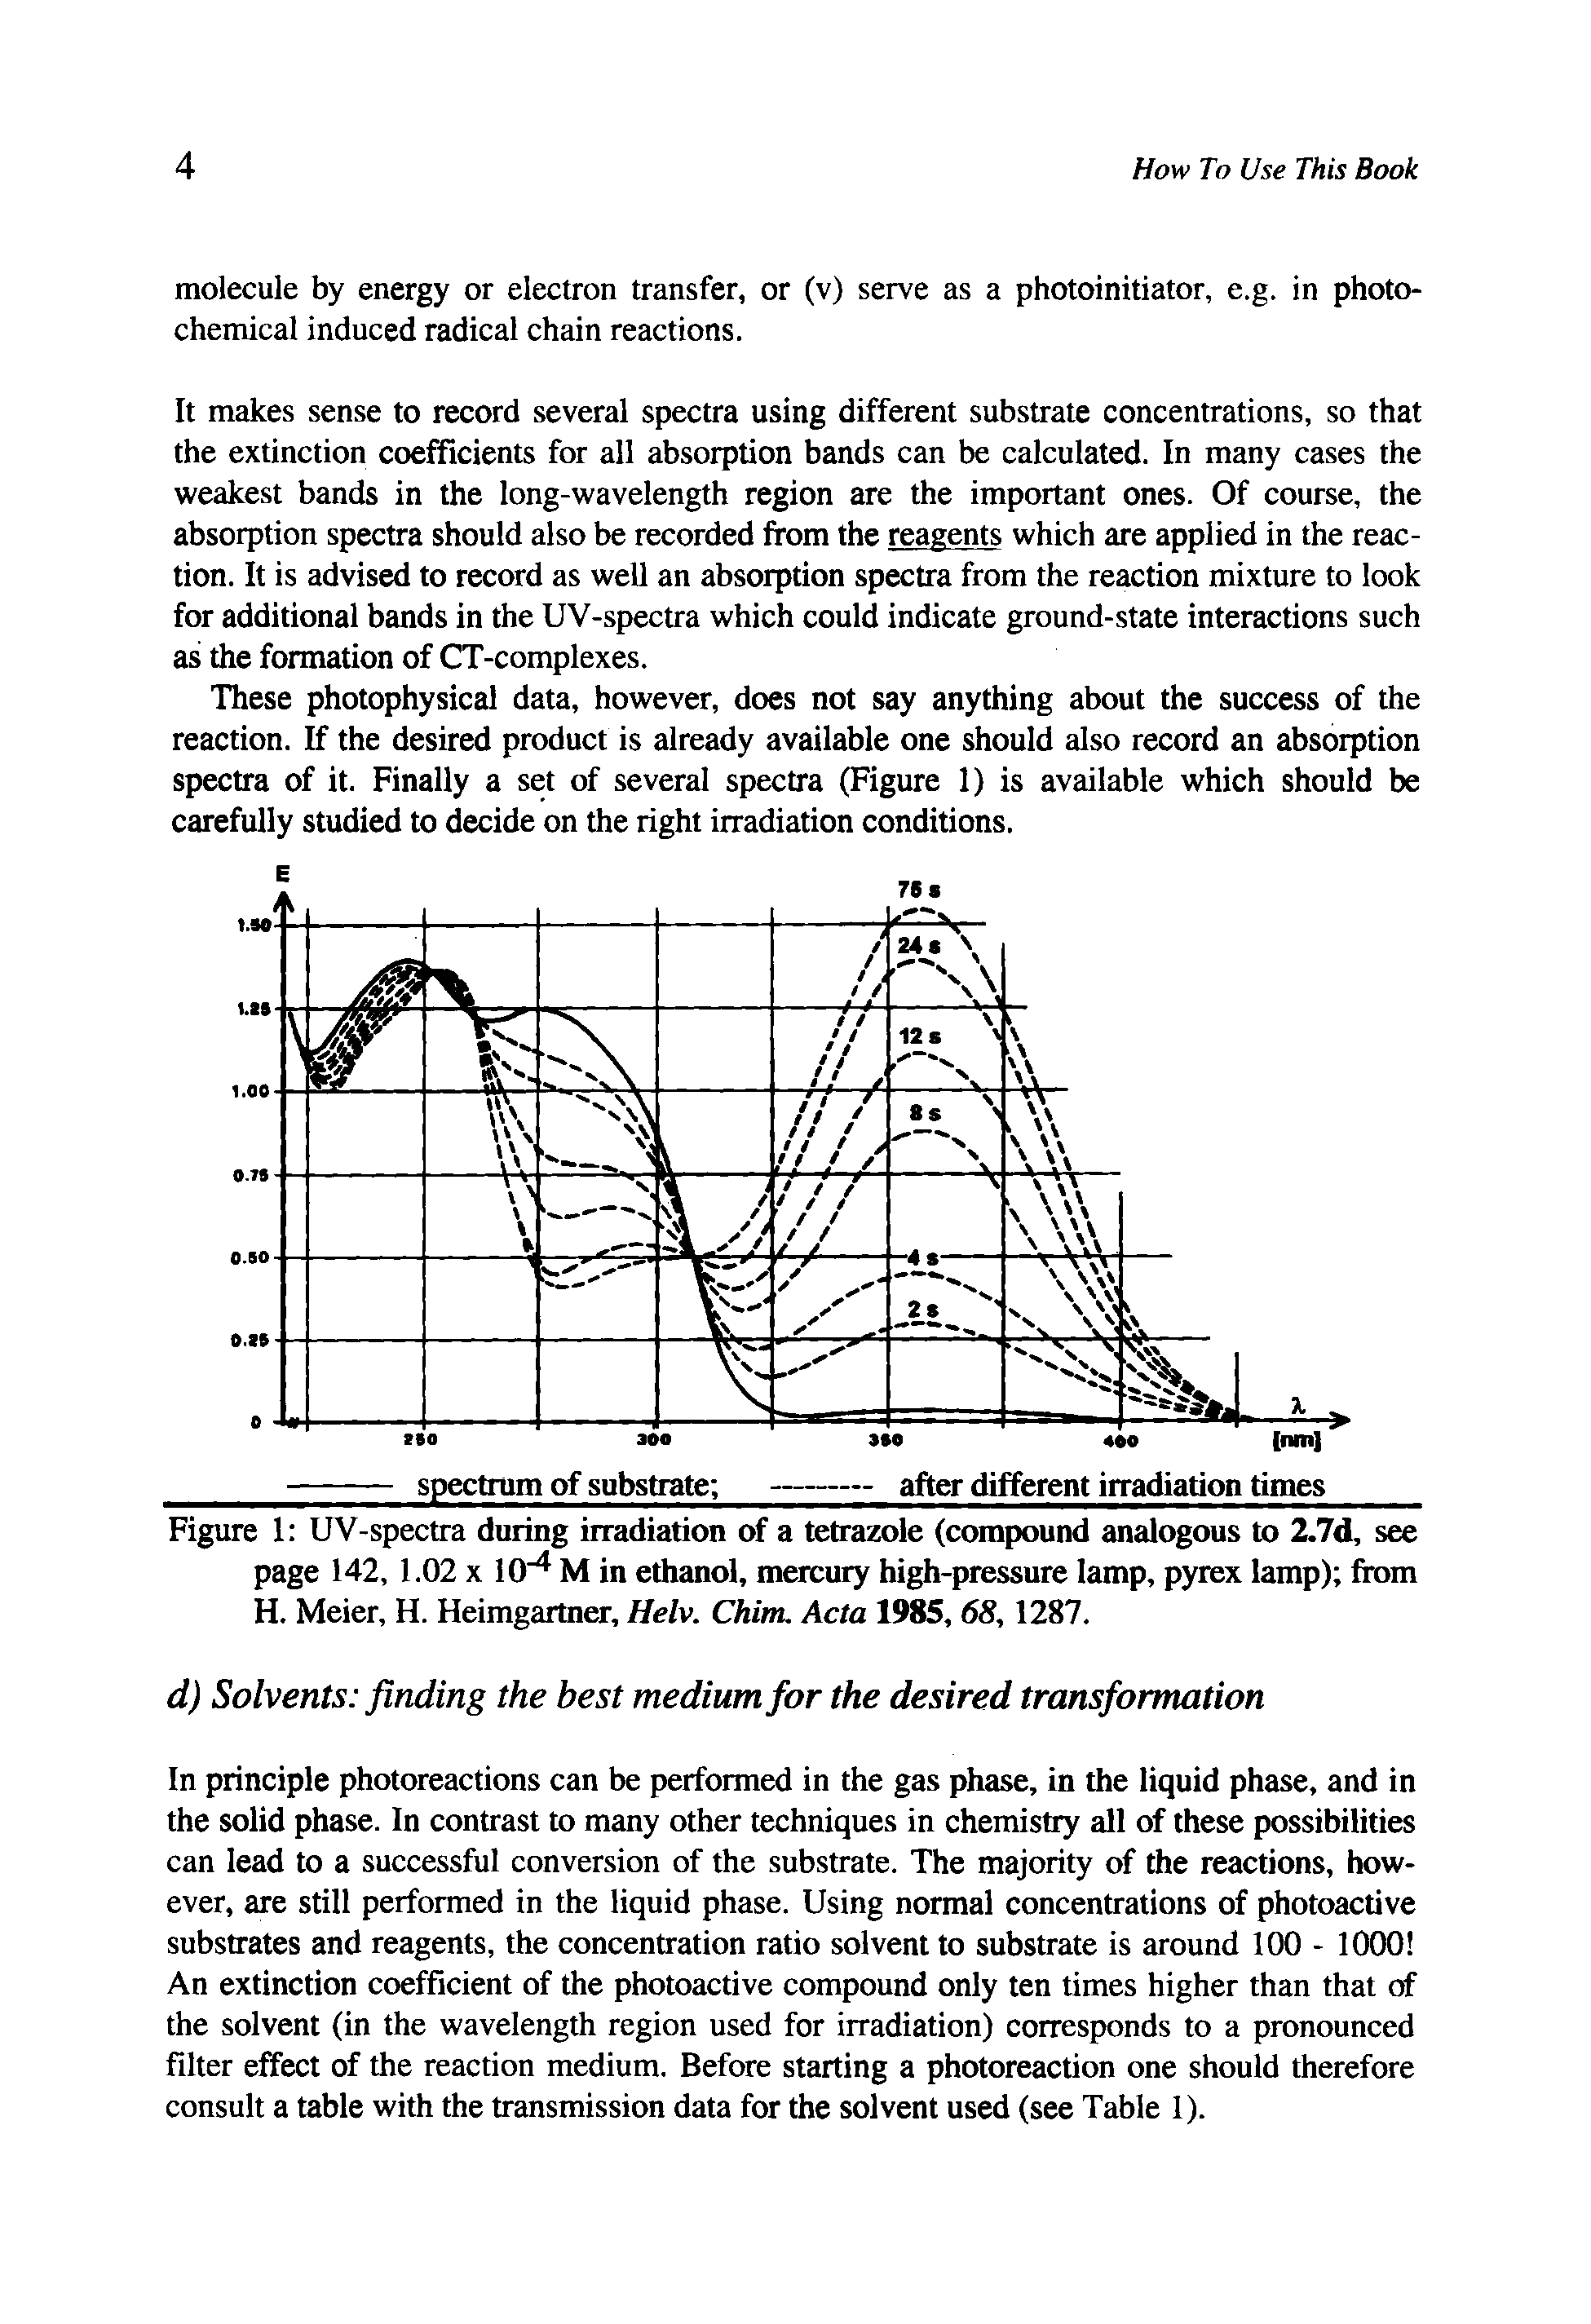 Figure 1 UV-spectra during irradiation of a tetrazole (compound analogous to 2.7d, see page 142, 1.02 x 10" M in ethanol, mercury high-pressure lamp, pyrex lamp) from H. Meier, H. Heimgartner, Helv. Chim. Acta 1985, 68,1287.